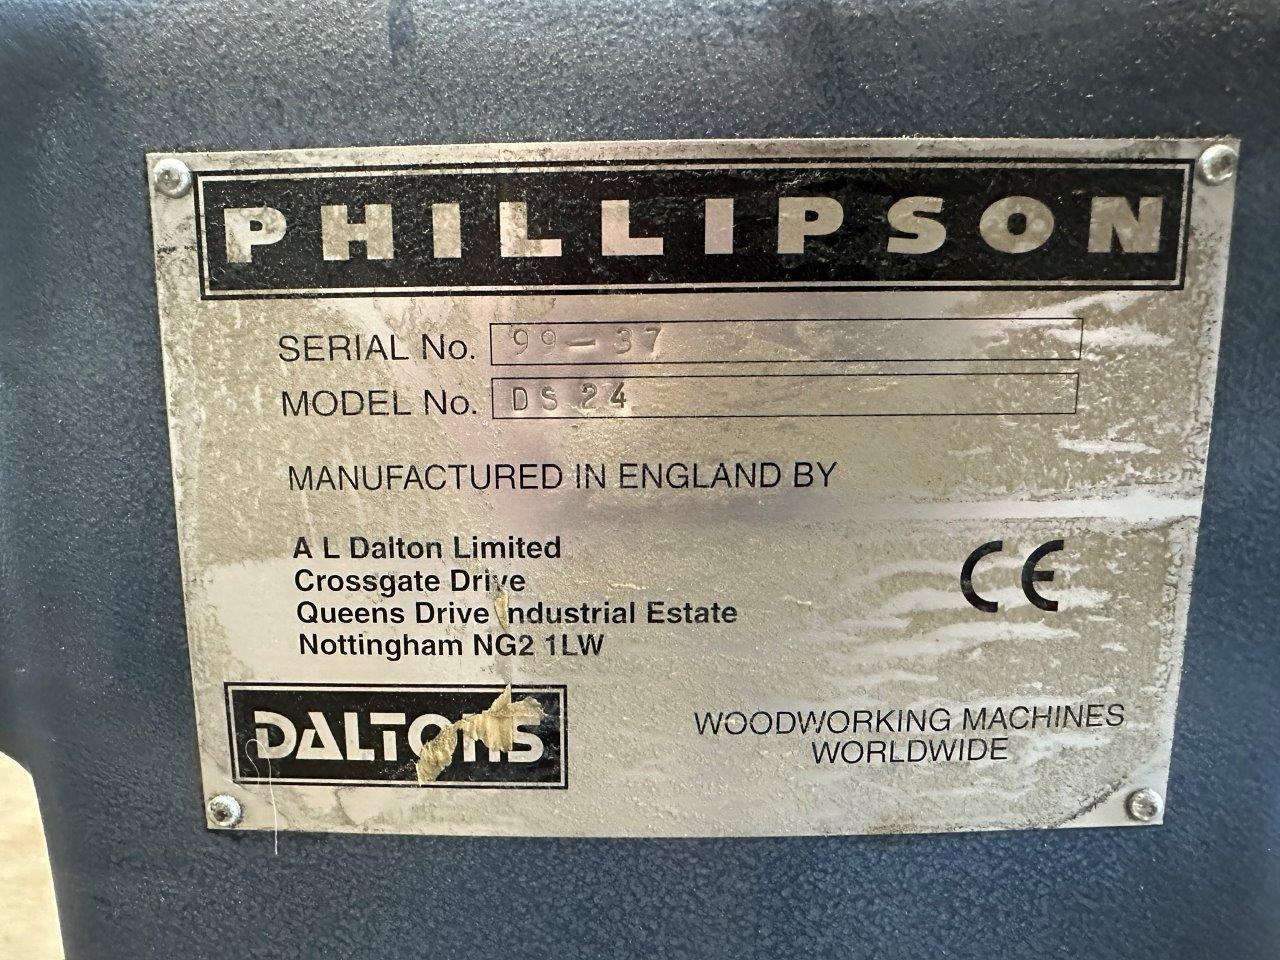 Woodworking Machinery/Phillipson Model DS-24 24" disc Sander (4379)